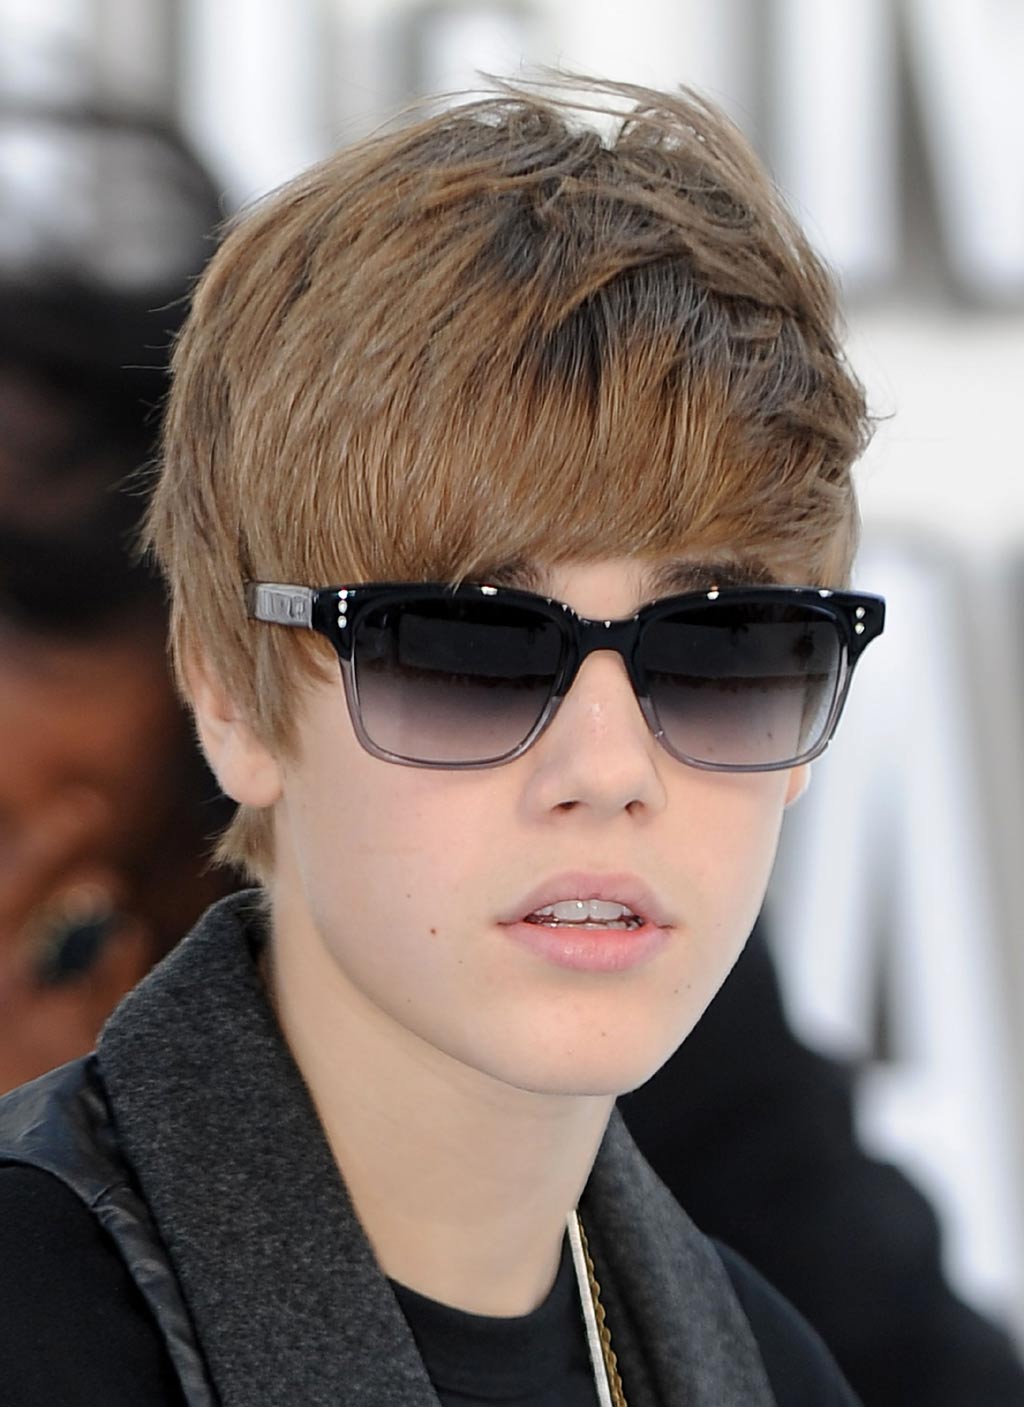 Justin Bieber Singer Profile and New Photos-Images 2012 ...
